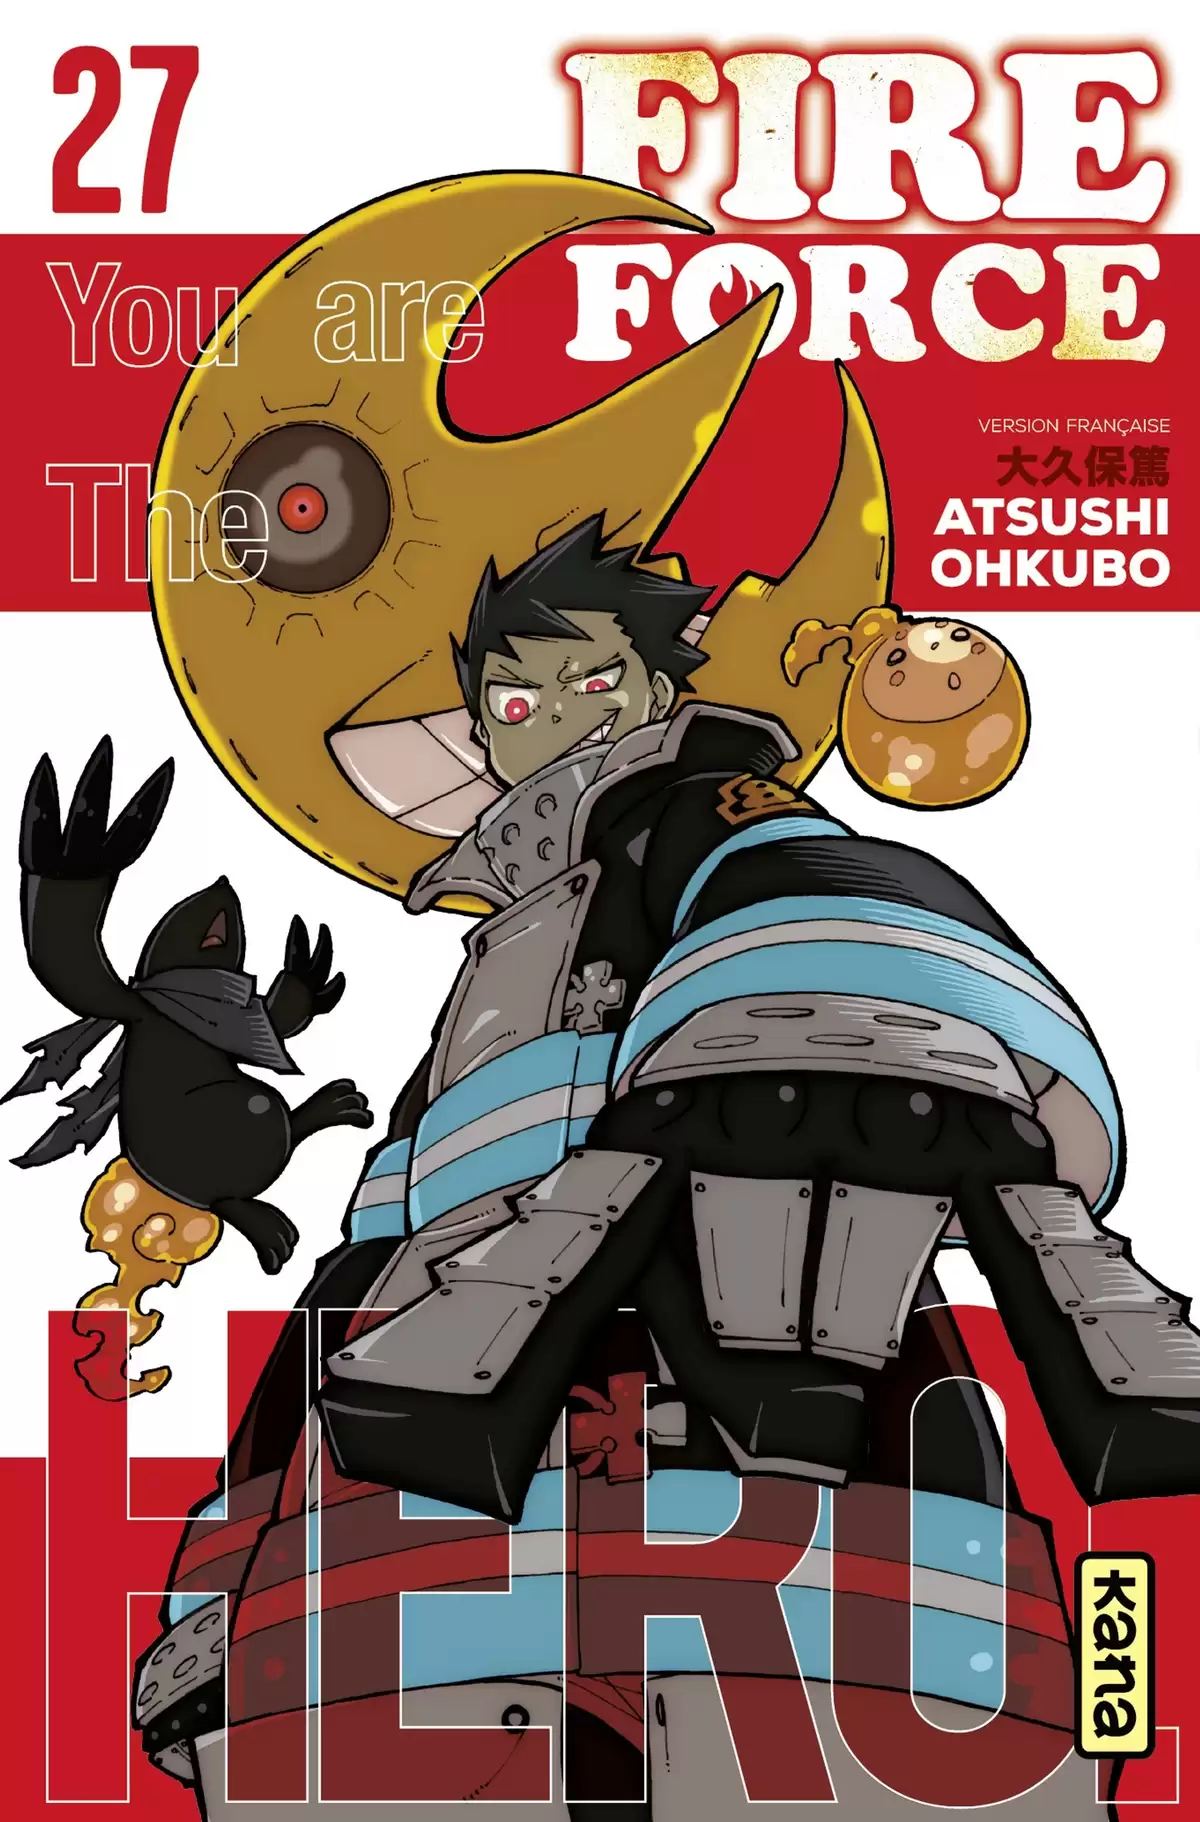 Fire Force Volume 27 page 1